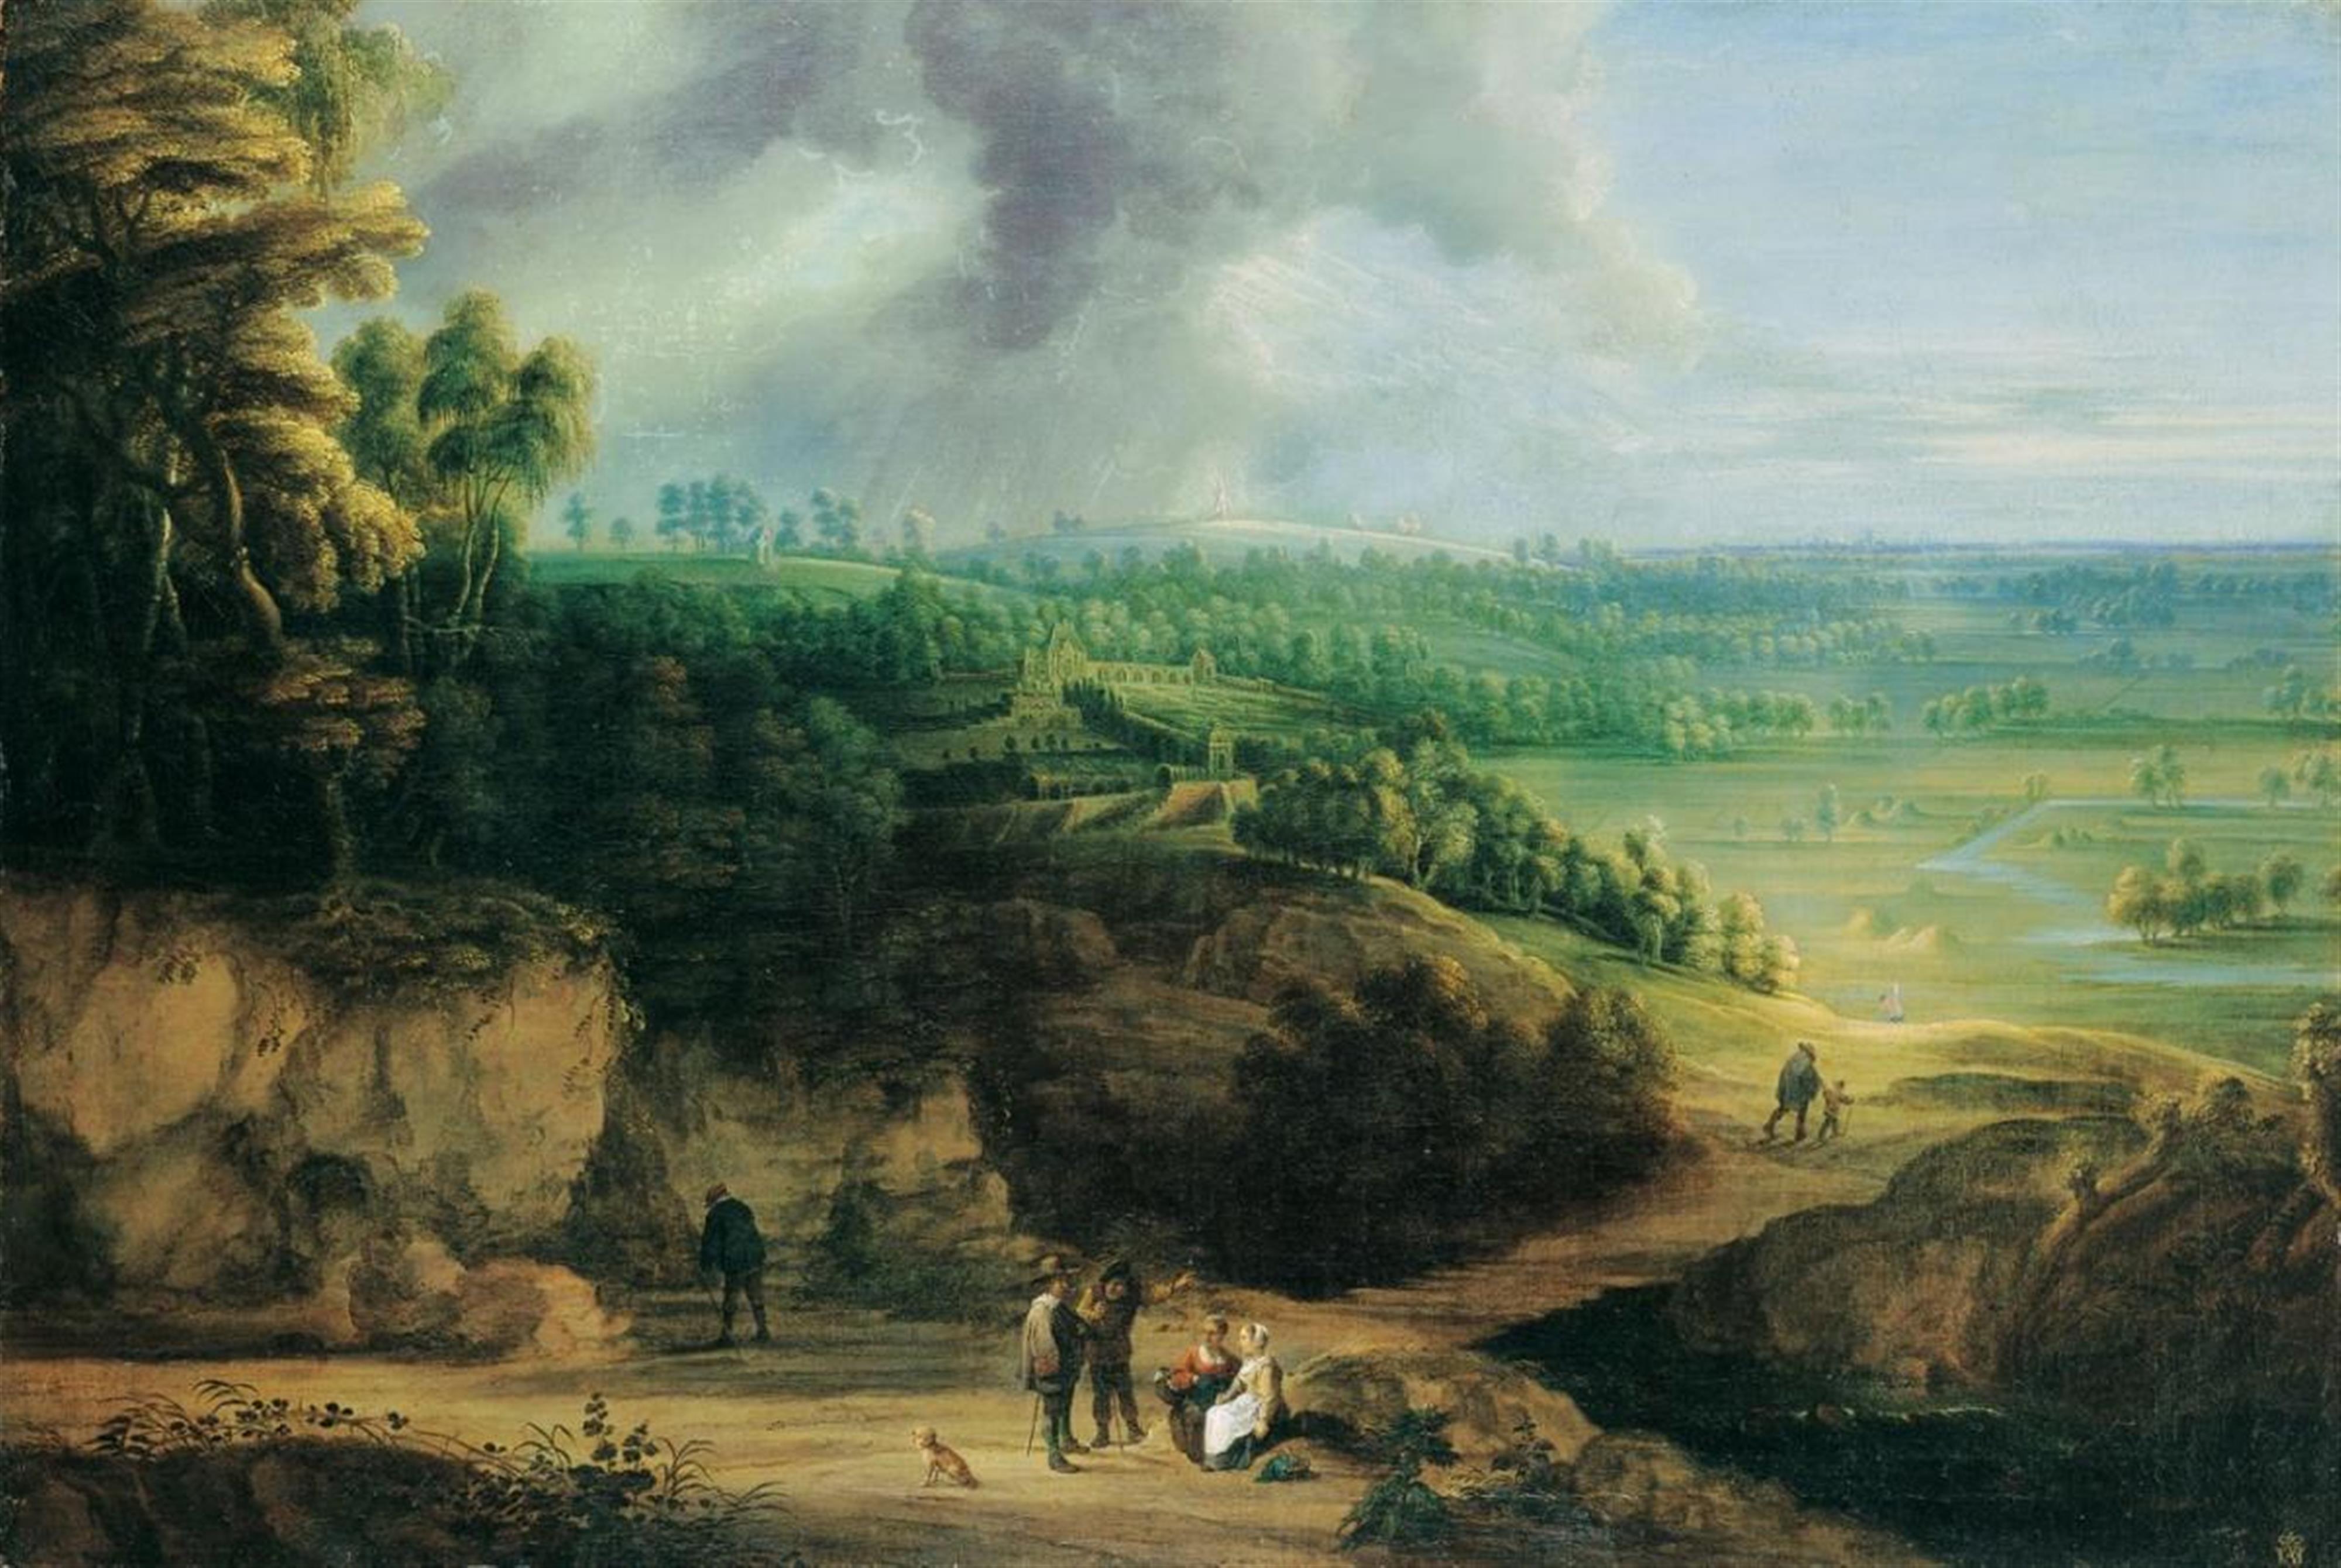 Lucas van Uden and DAVID TENIERS THE YOUNGER - PANORAMIC LANDSCAPE WITH CASTLE AND FIGURES - image-1